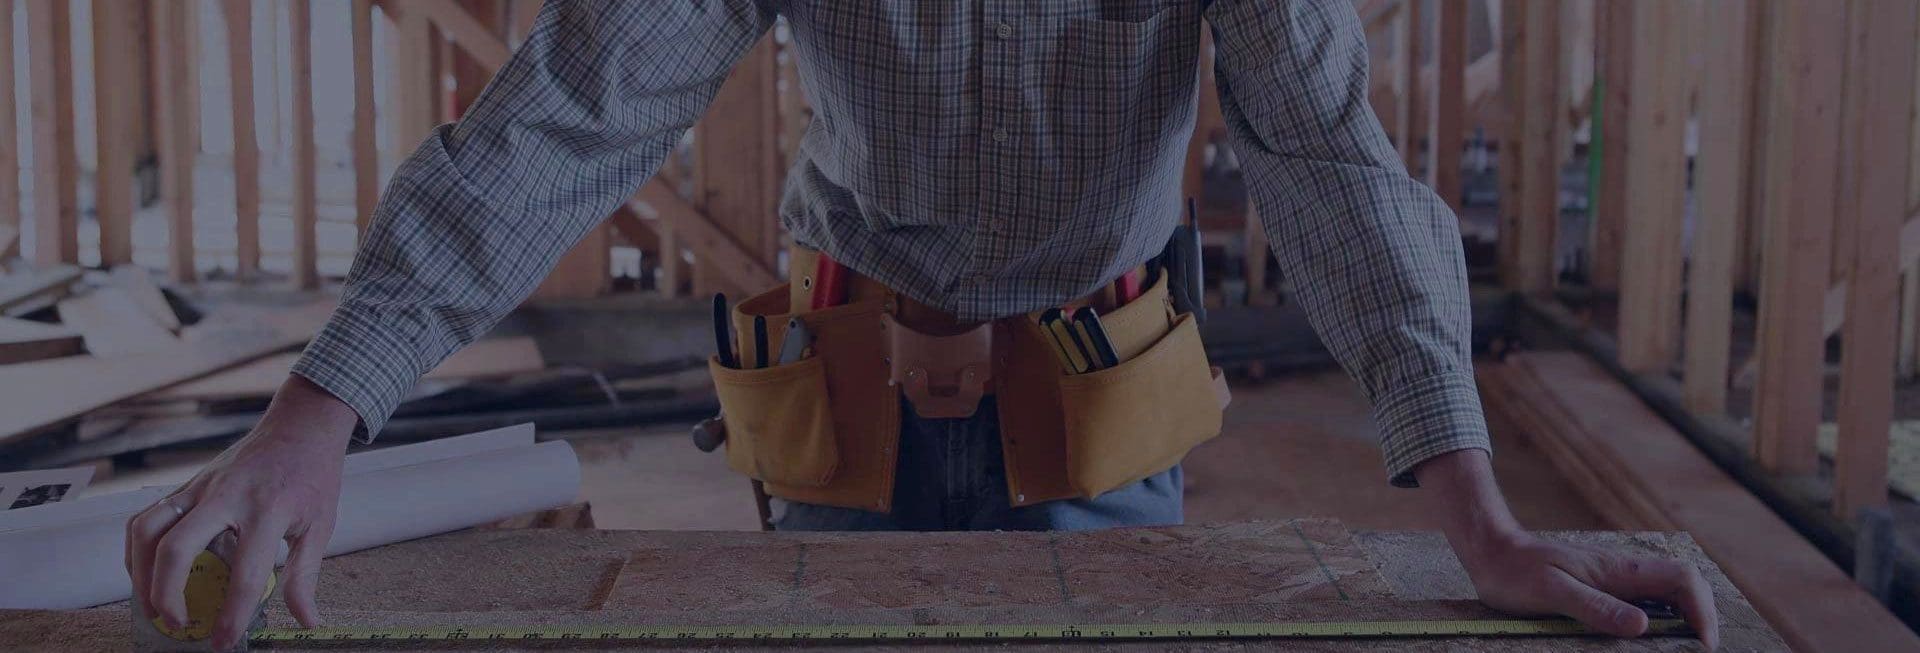 A person with their hands in the pockets of his work pants.